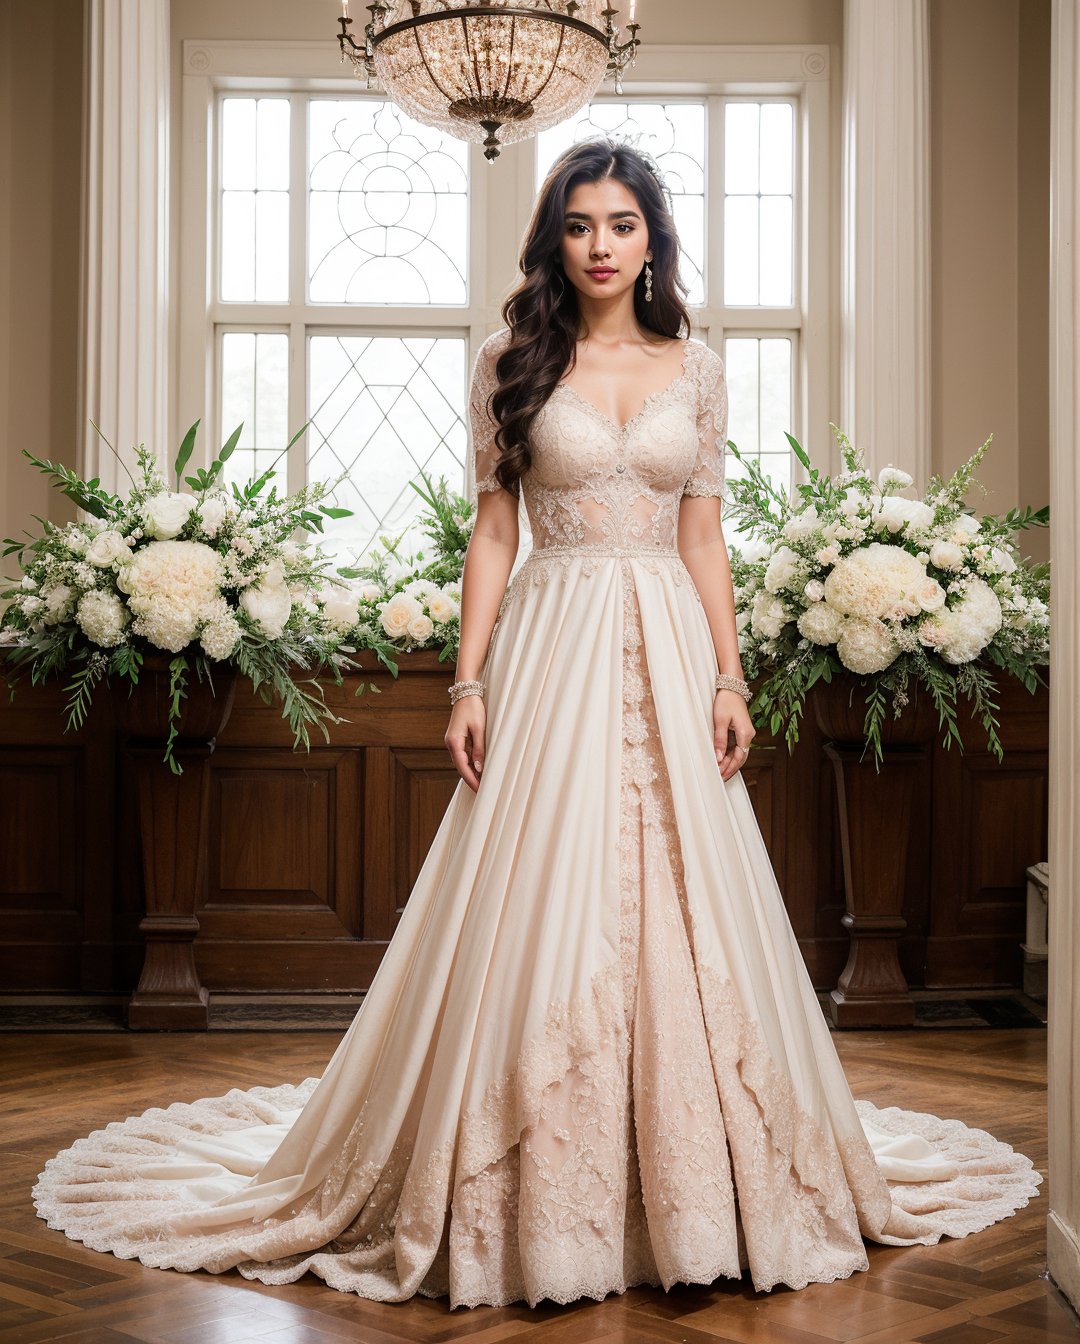 masterpiece,best quality,ultra detailed,northeastern_south_asian_girl, slim-fit_wedding_gown, exquisite_lace, silk_fabric, intricate_embroidery, delicate_beadwork, form-fitting, long_dark_wavy_hair, sparkling_hairpins, soft_wave_hairstyle, minimal_makeup, natural_beauty, subtle_blush, soft_pink_lipstick, ornate_wedding_venue, grand_floral_arrangements, elegant_decor, luxurious_ambiance, bridal_grace, timeless_charm